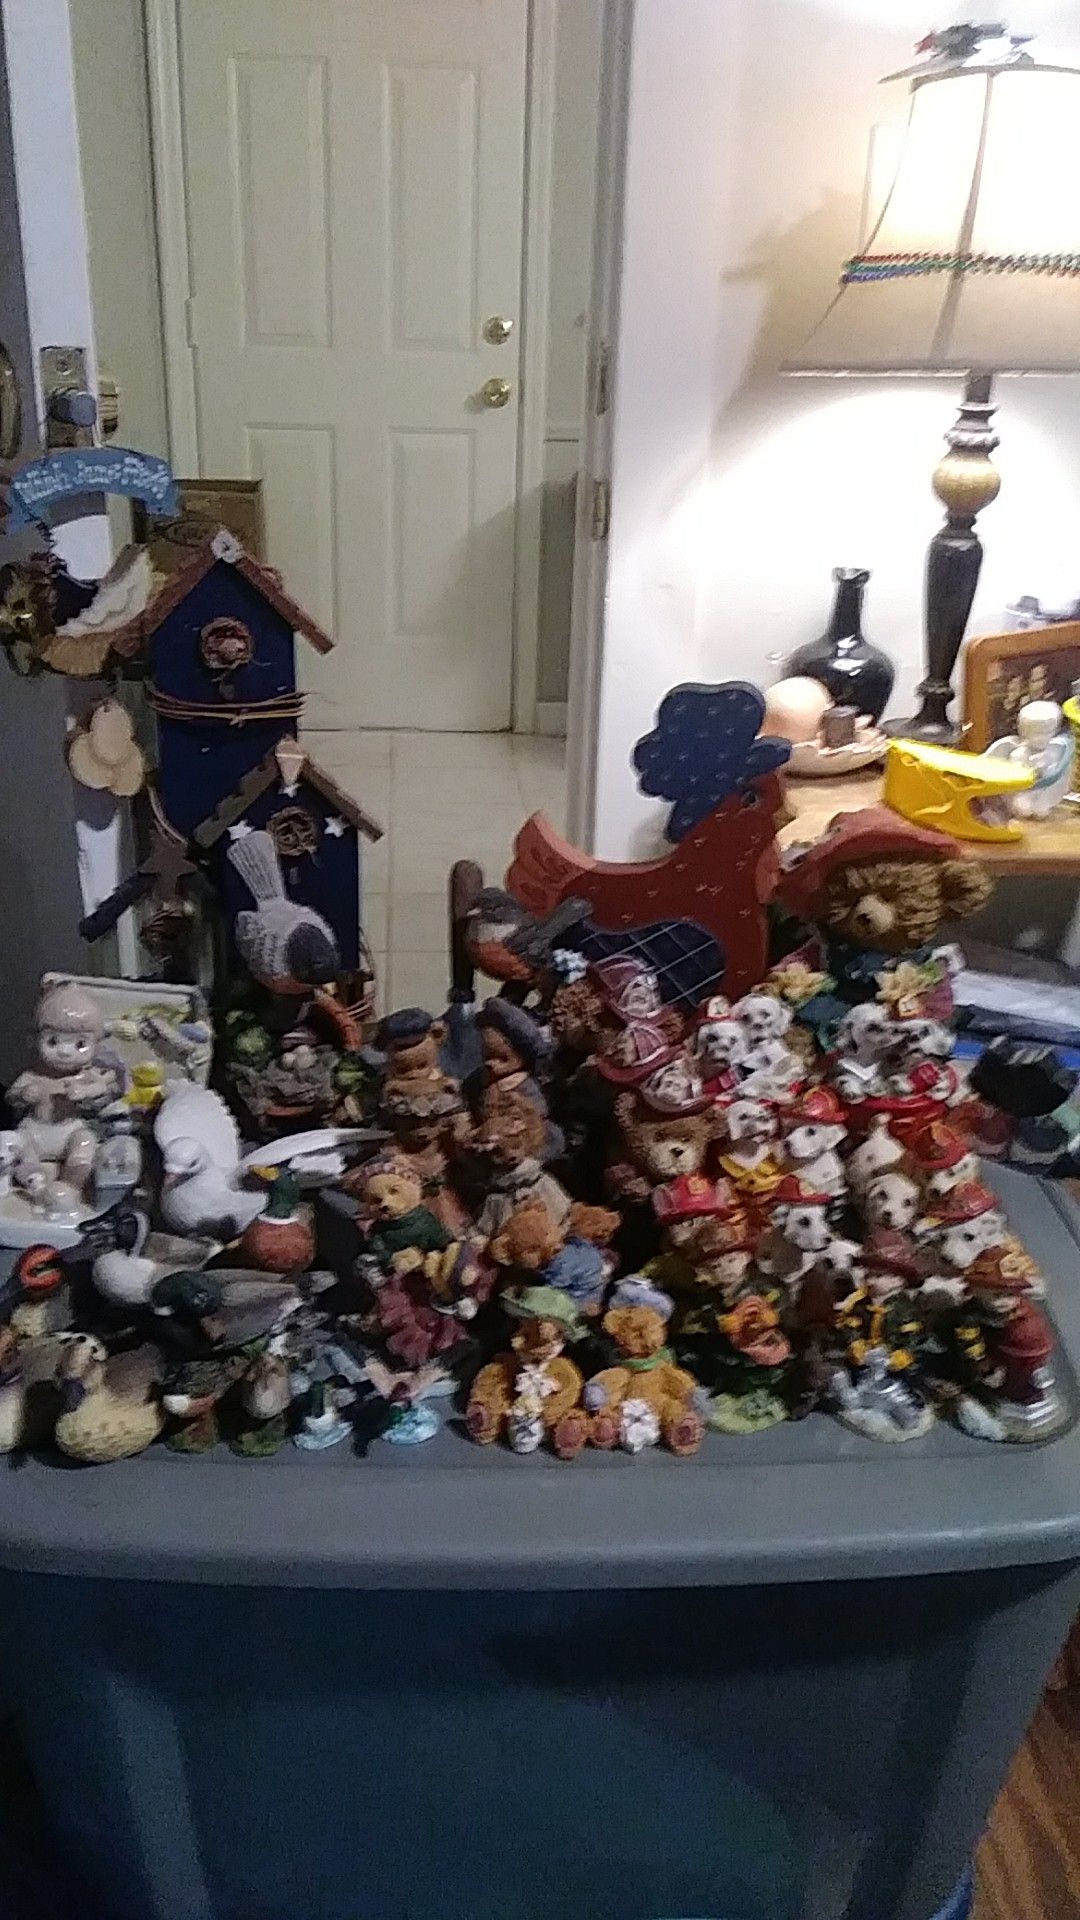 45+ Misc. Figures , Wood Wall Hanging Decor & Vintage Decor Plate all ate in good condition no cracks or chips